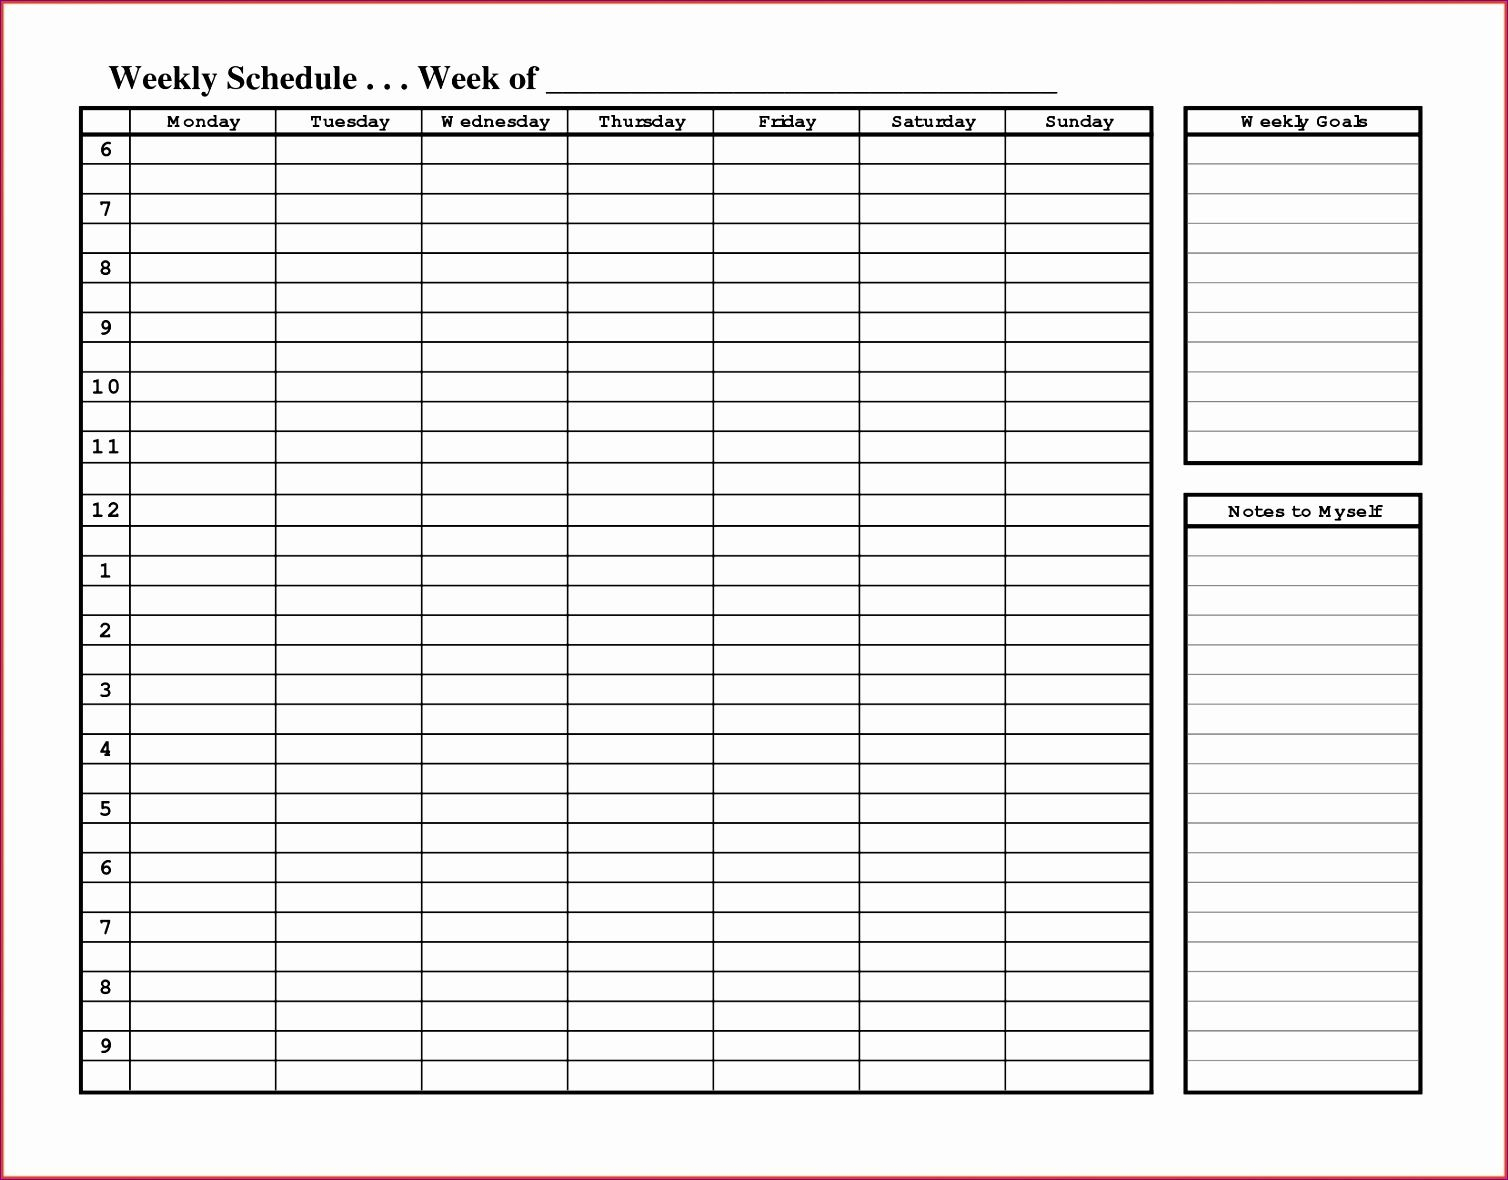 Daily Appointment Calendar Printable E With Time Slots for Daily Calendar With Time Slots